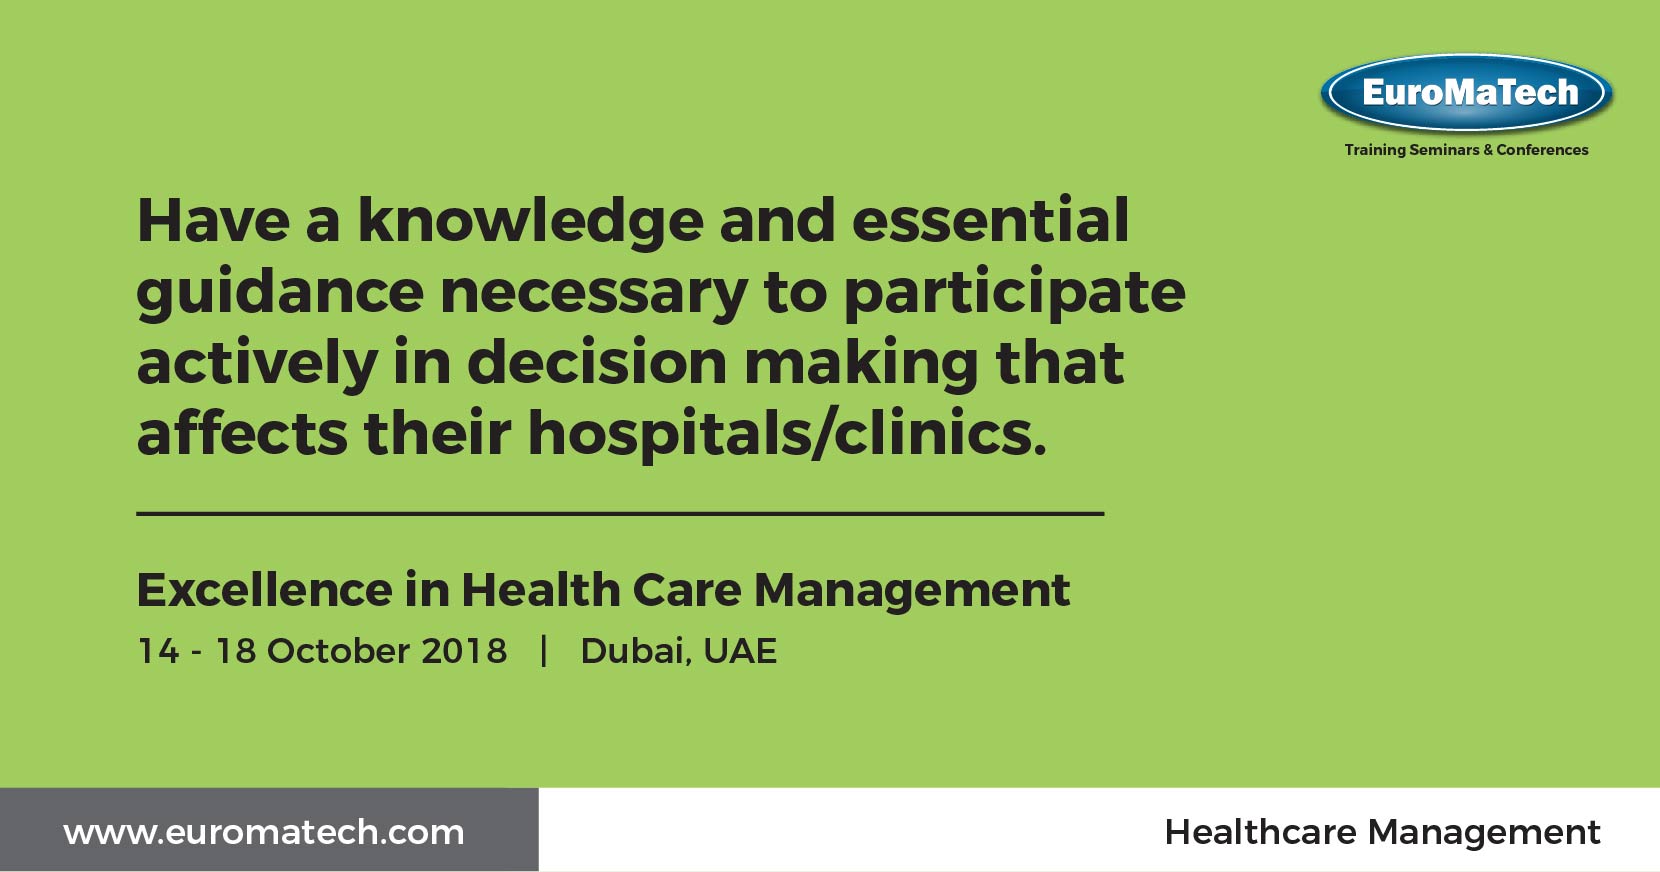 Excellence in Health Care Management Training Course in Dubai